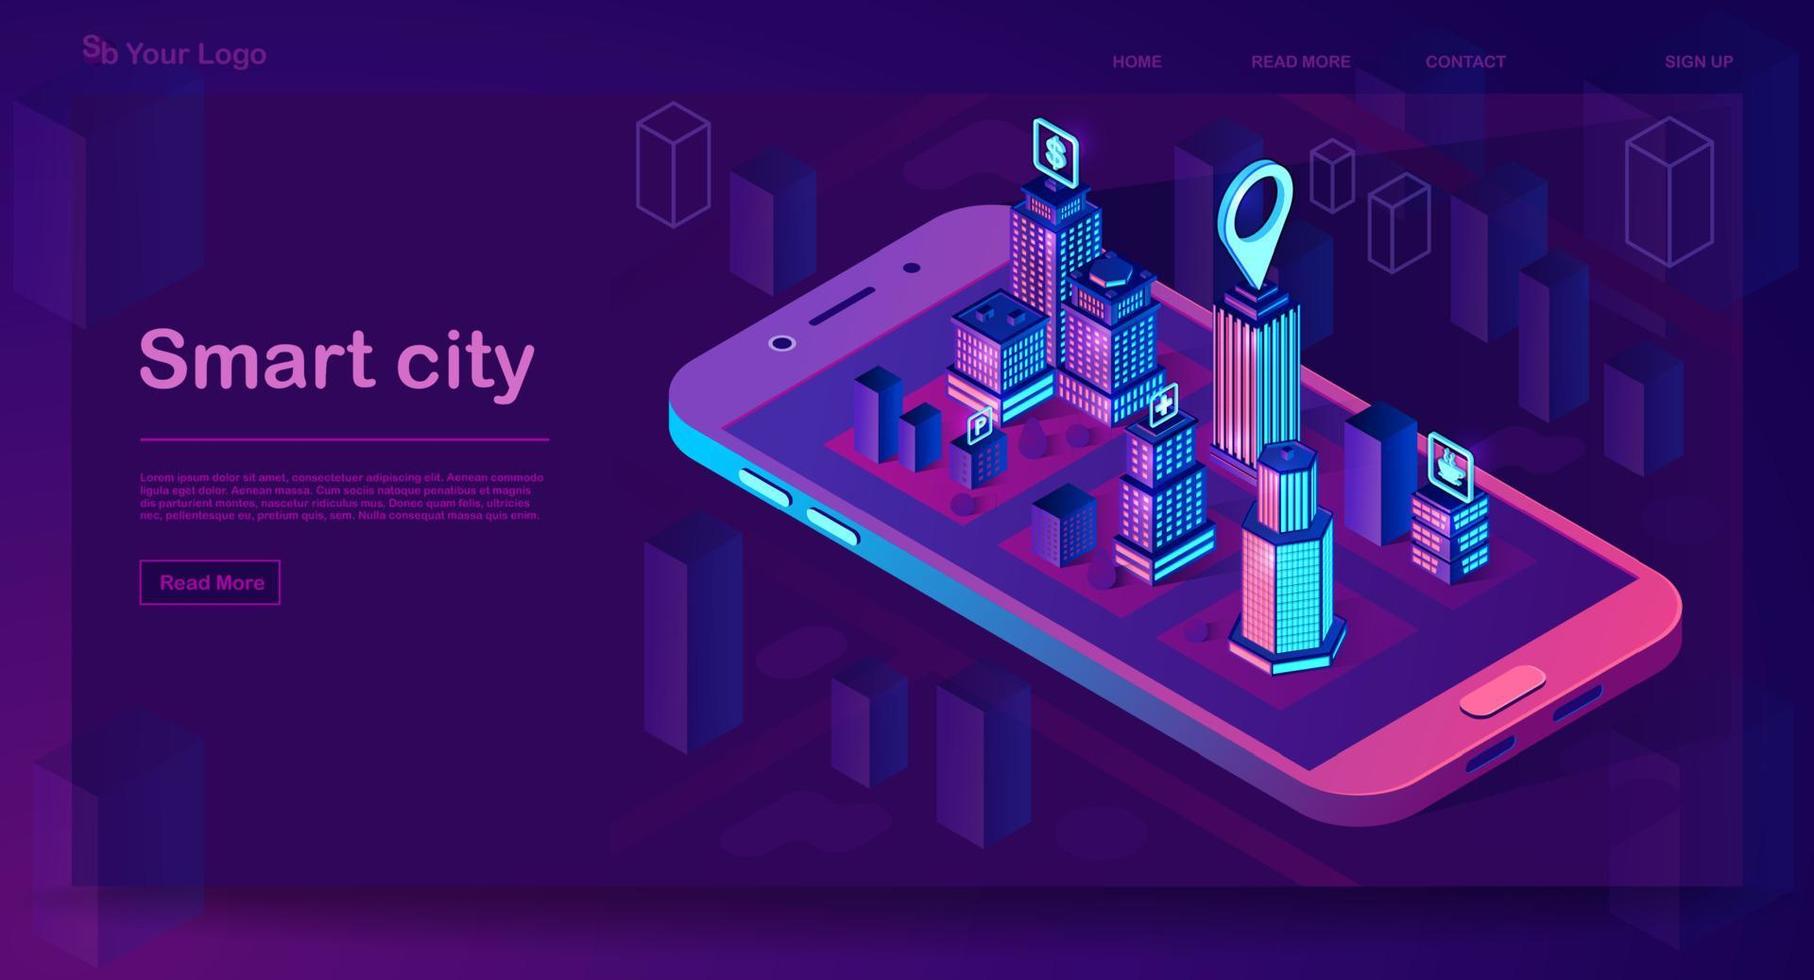 Smart city isometric architecture concept. Web banner with neon buildings. Futuristic 3d city smartphone app map. Intelligent buildings with signs. Internet of things. Isolated vector illustration